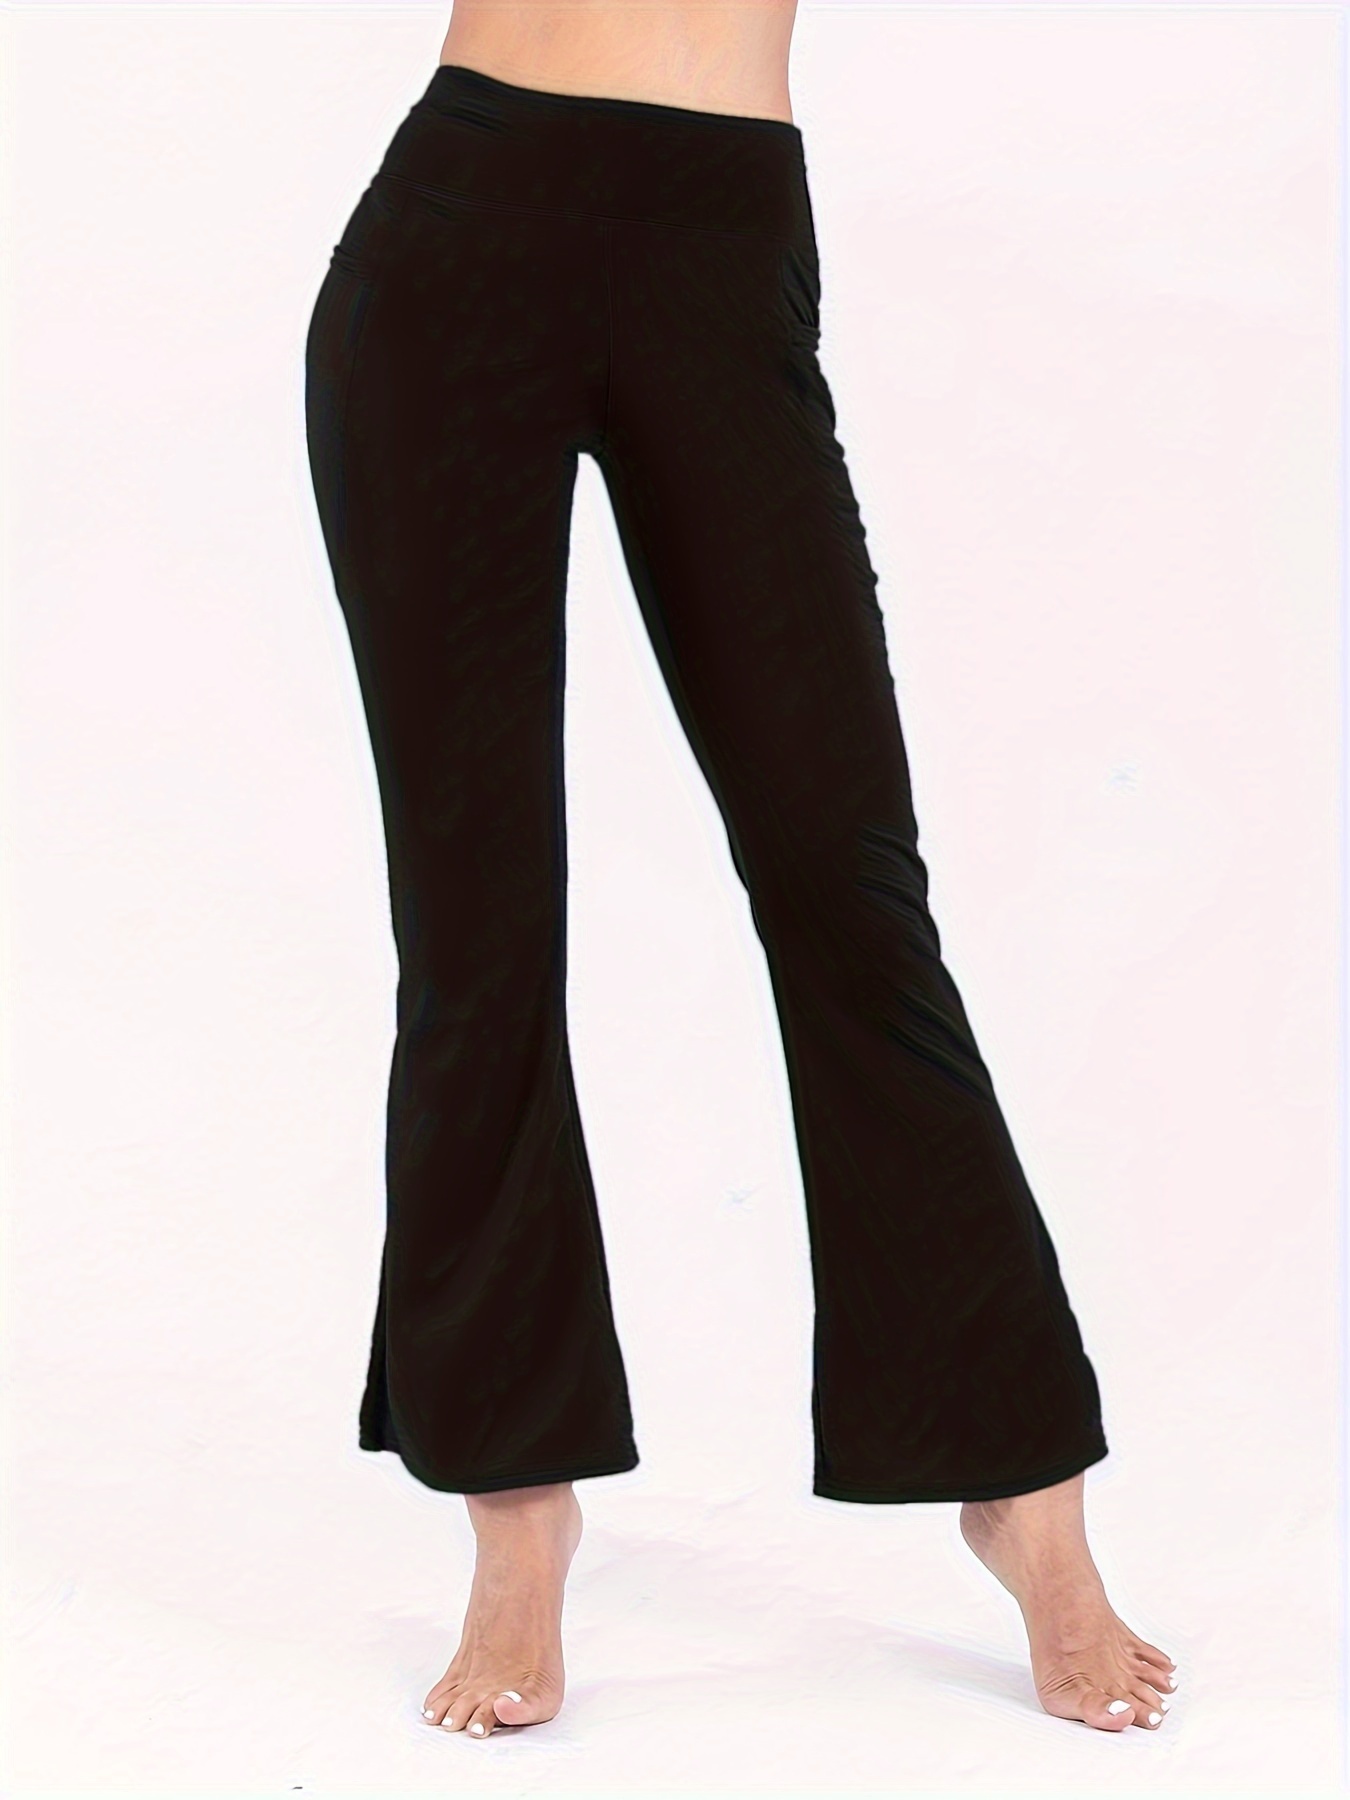 Women's Solid Color Dance & Yoga Flared Pants